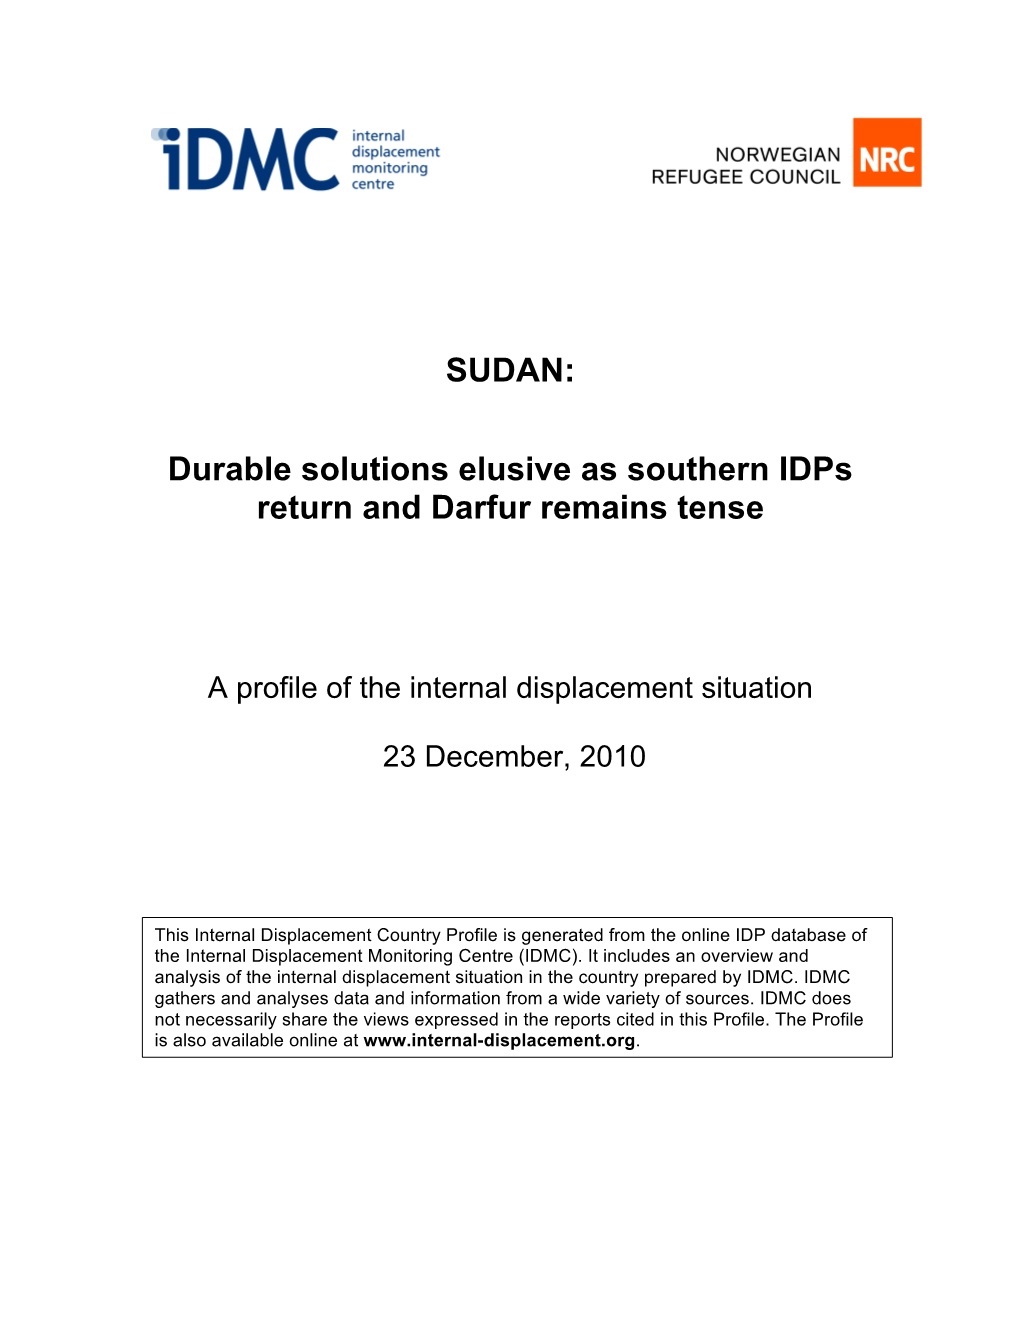 SUDAN: Durable Solutions Elusive As Southern Idps Return and Darfur